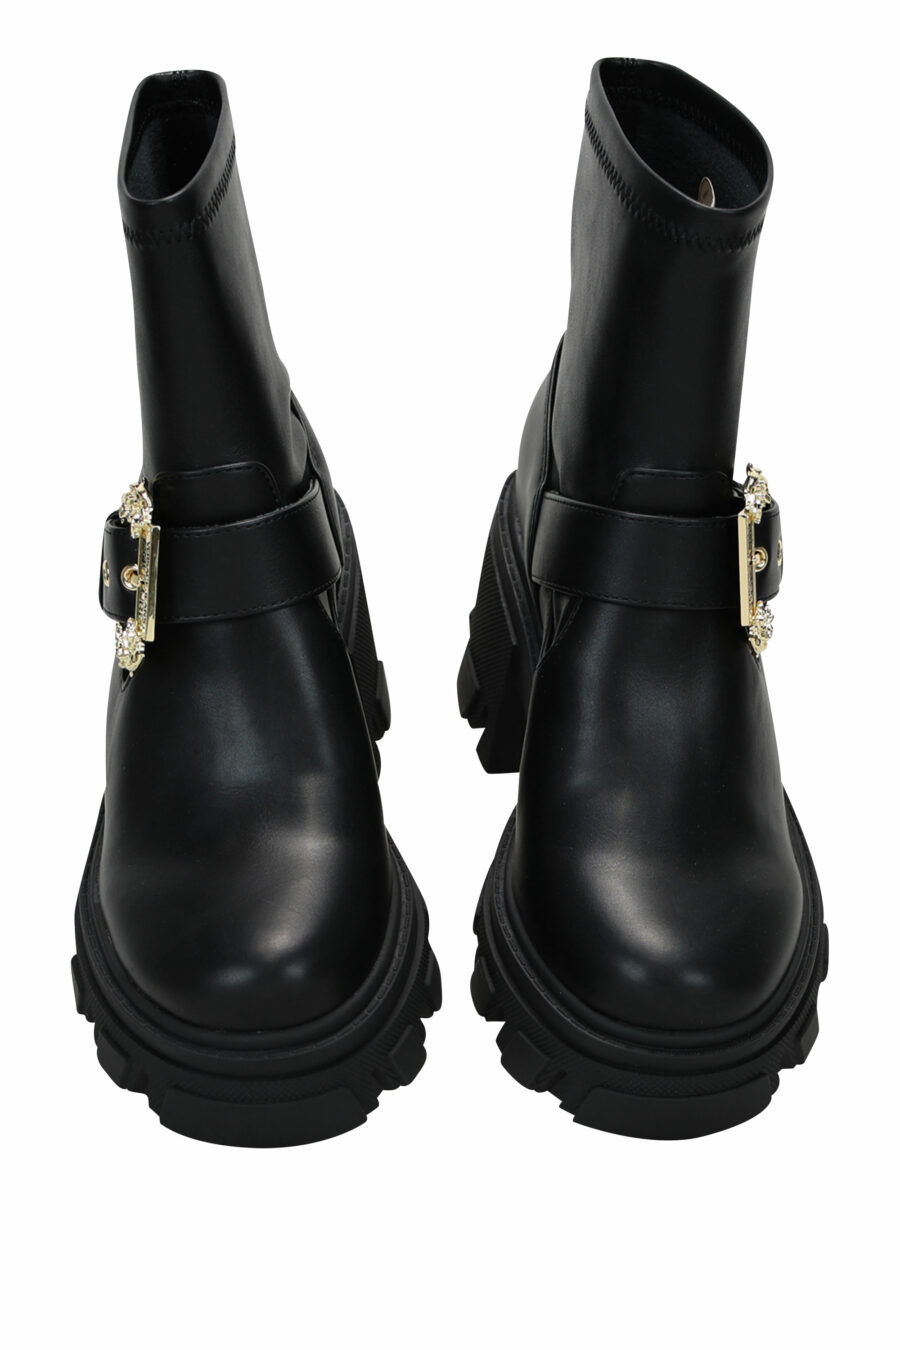 Black ankle boots with baroque buckle and platform - 8052019461084 4